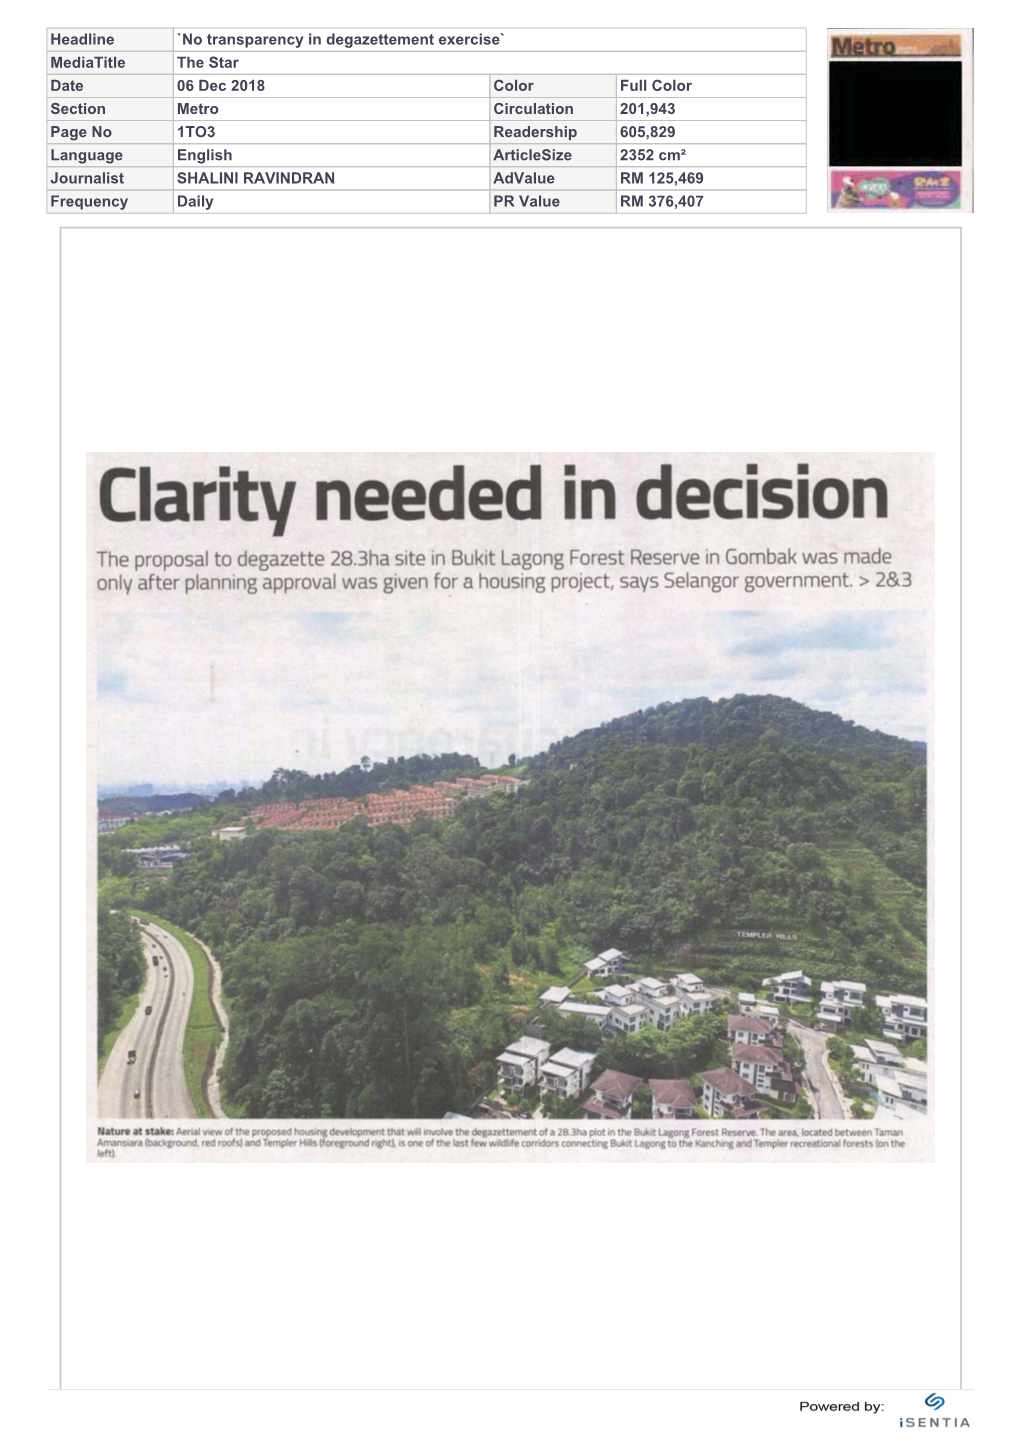 Clarity Needed in Decision